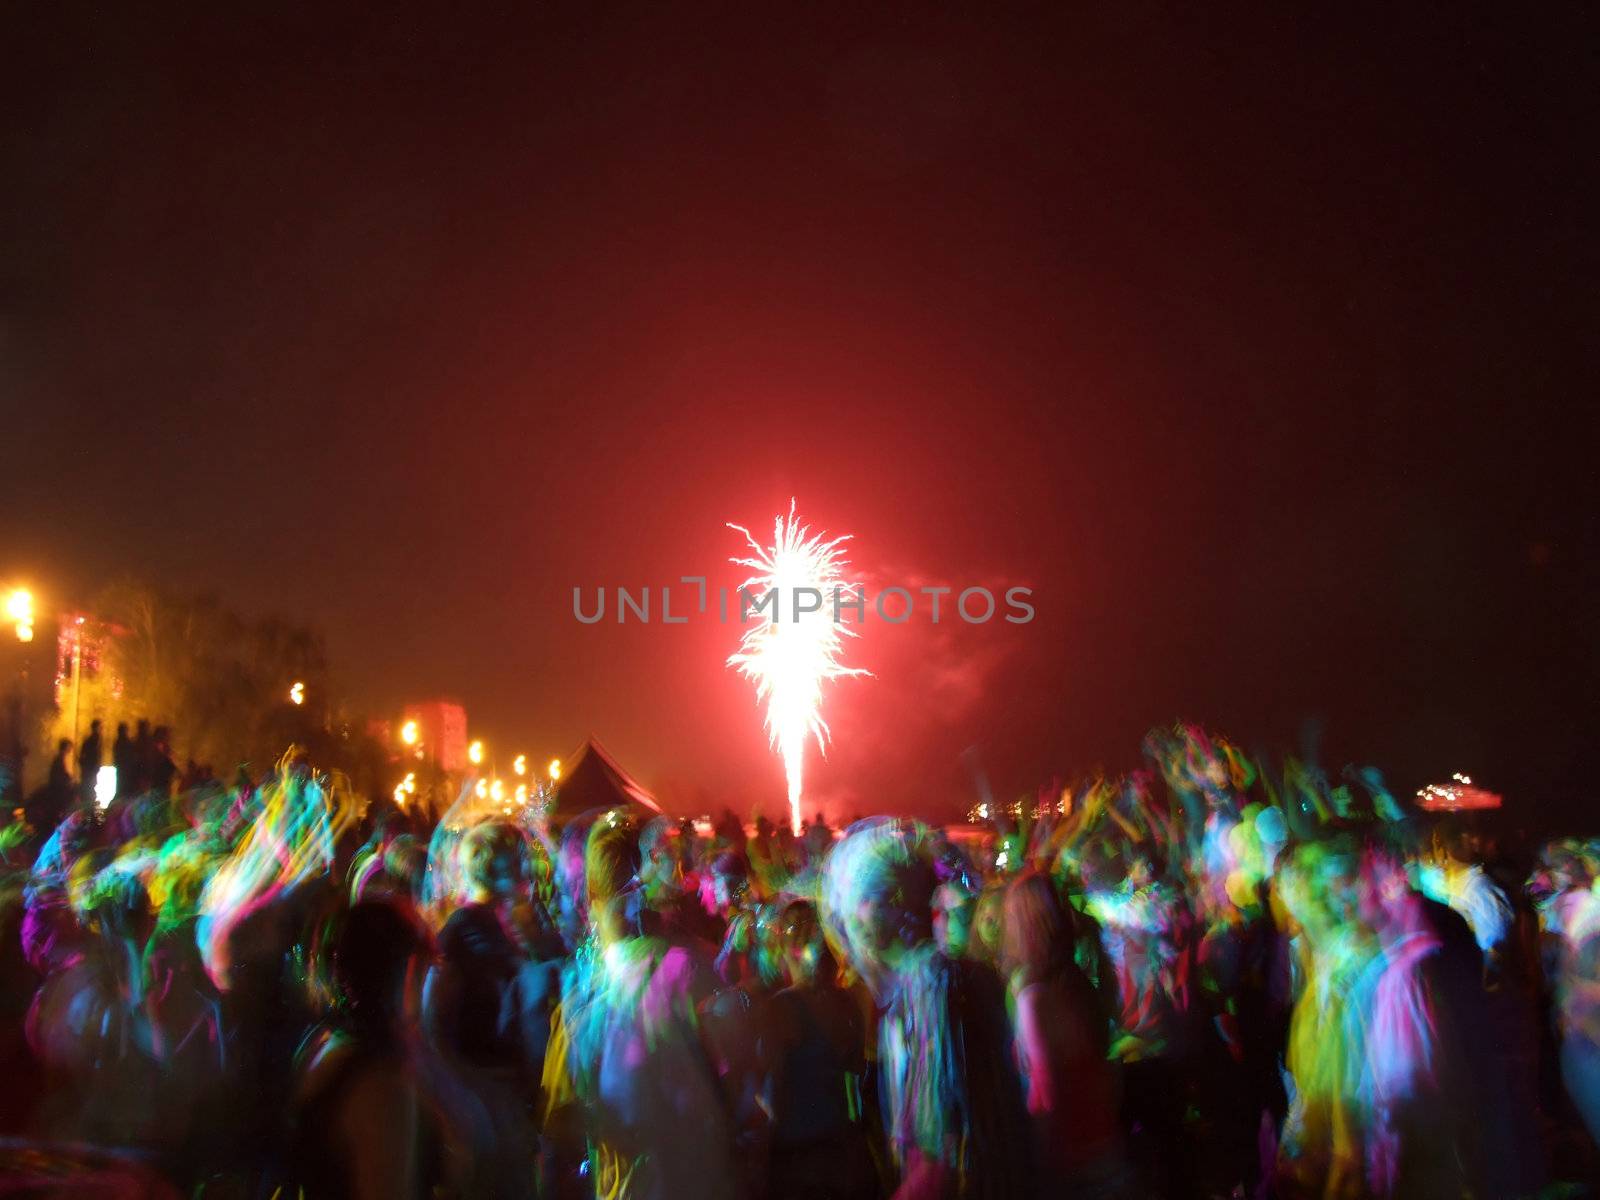 Fireworks over the crowd of people dancing on the beach by acidgrey